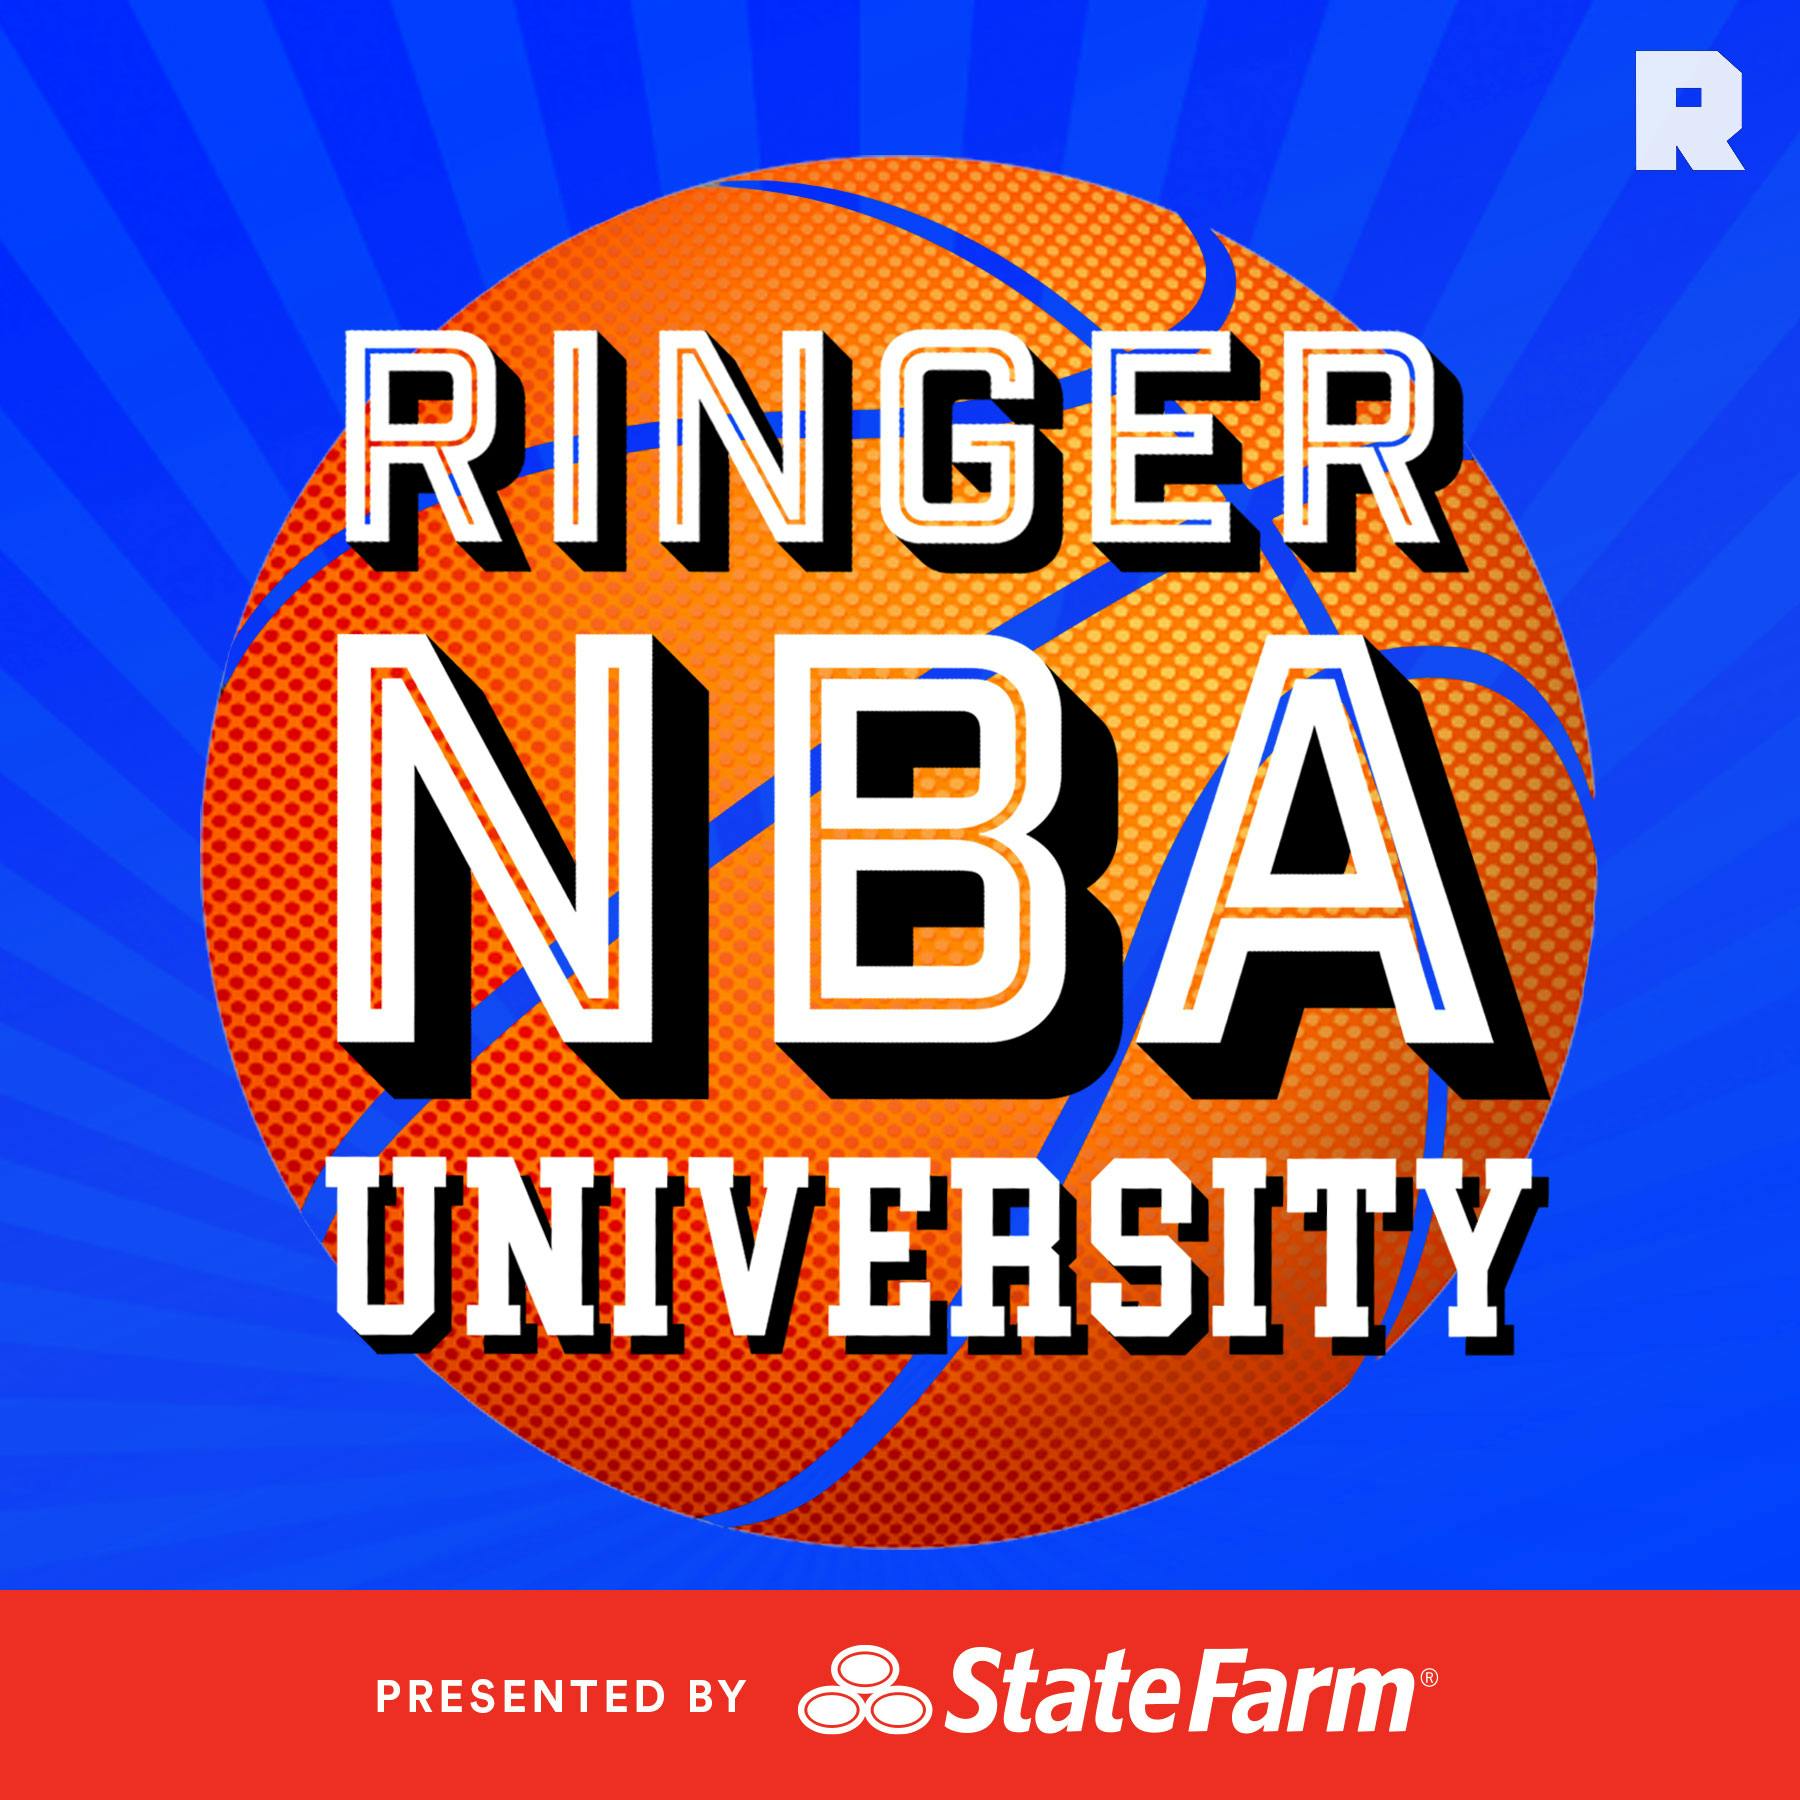 Potential First-time All-Stars and Basketball Diversity | Ringer NBA University